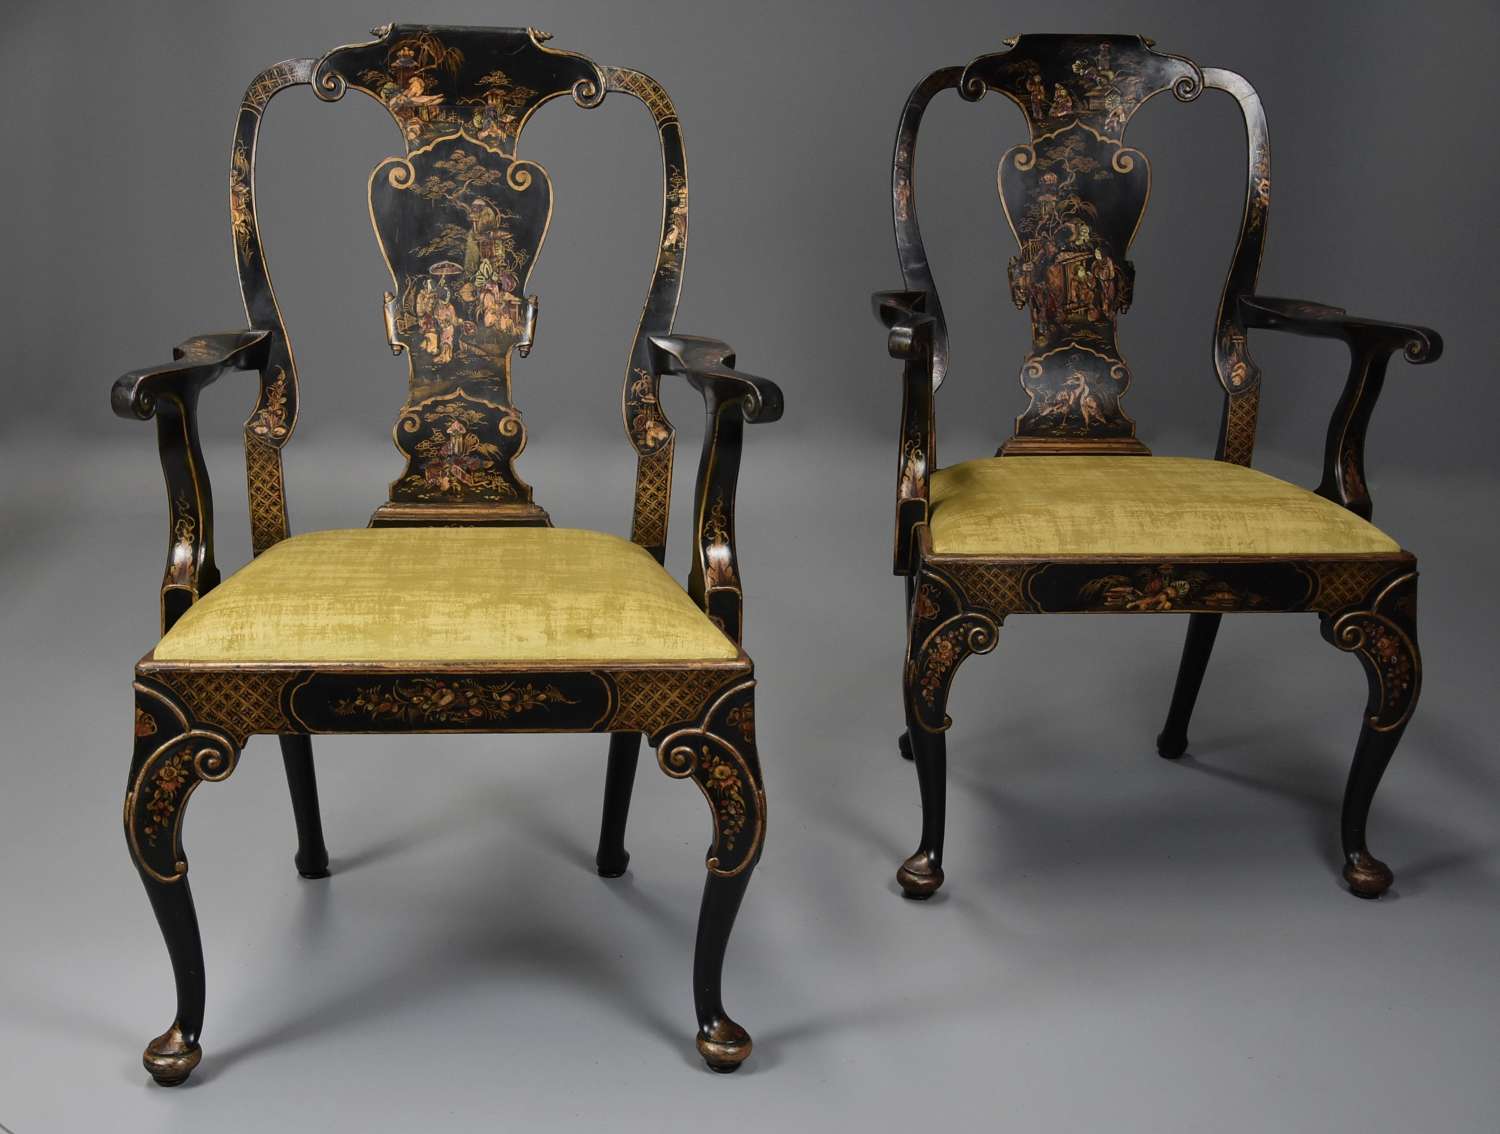 Superb pair of late 19thc George II style Japanned armchairs